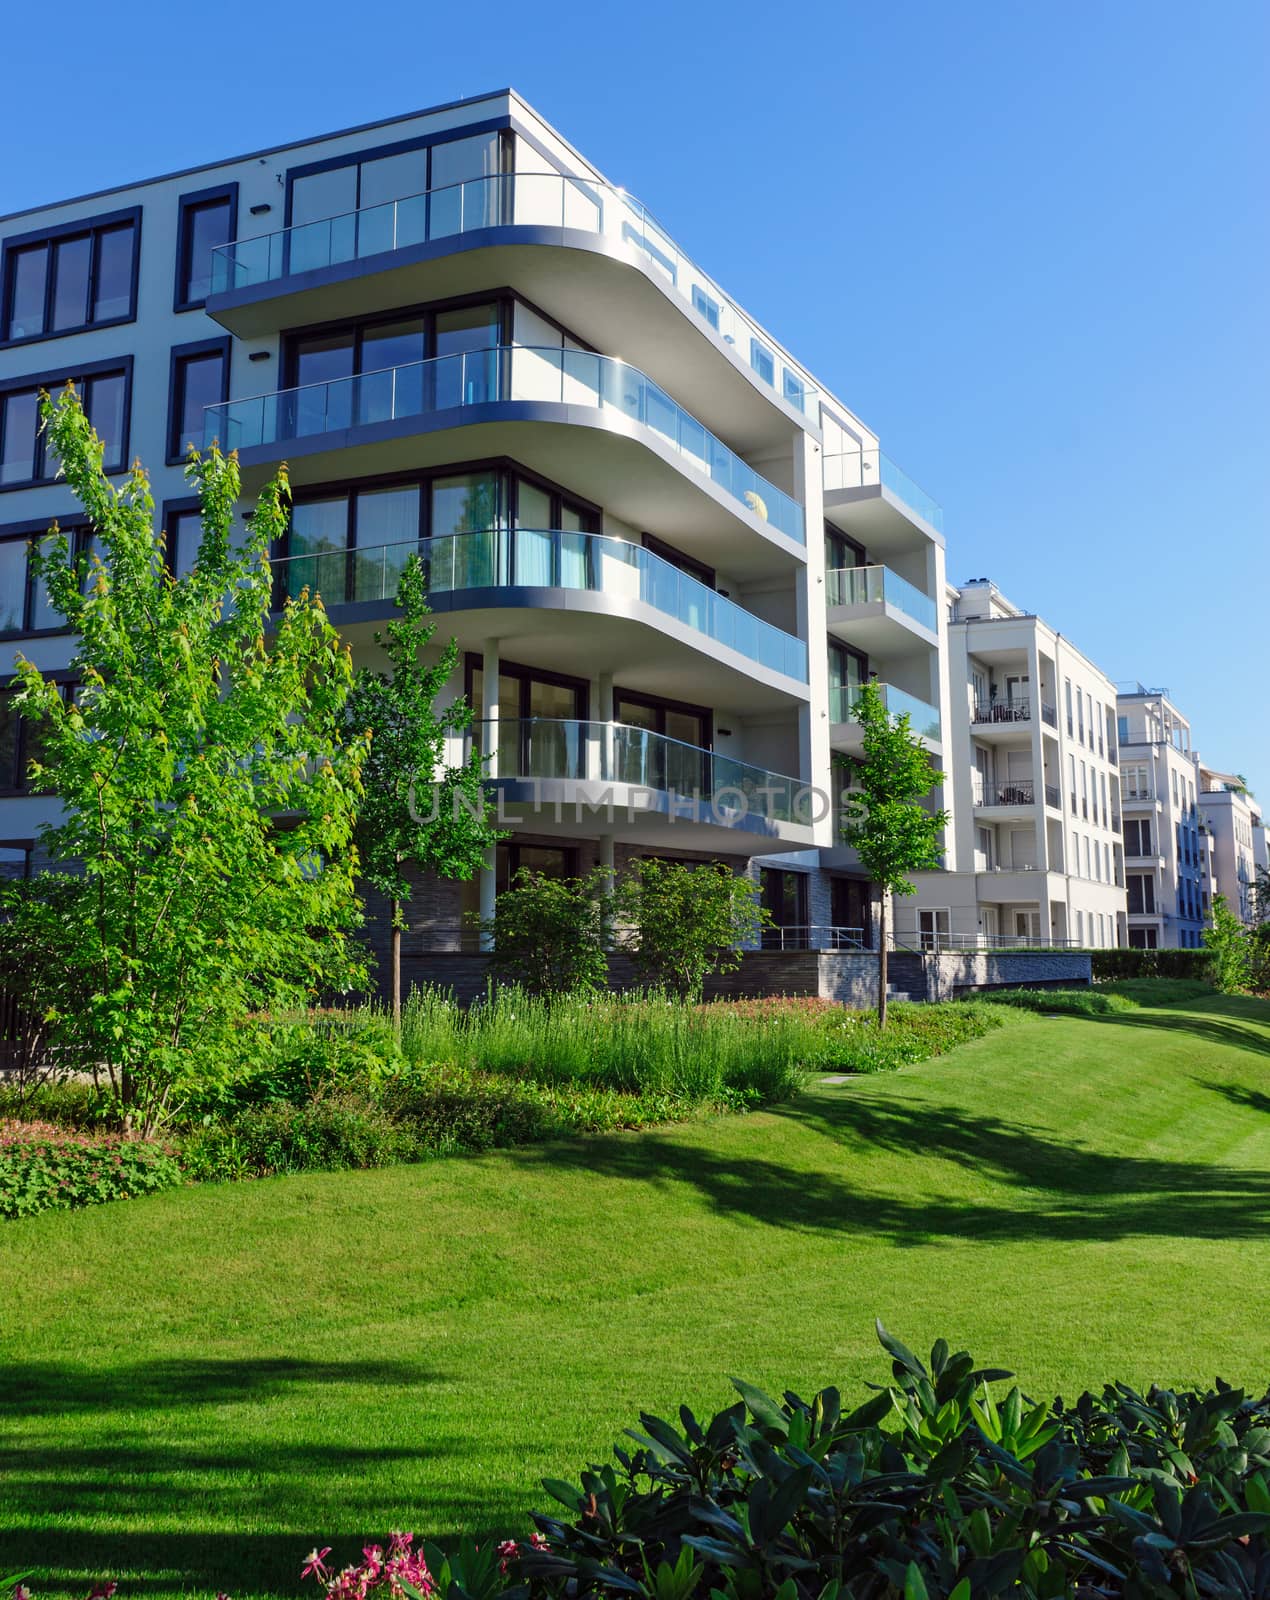 Luxury apartment houses with a green garden